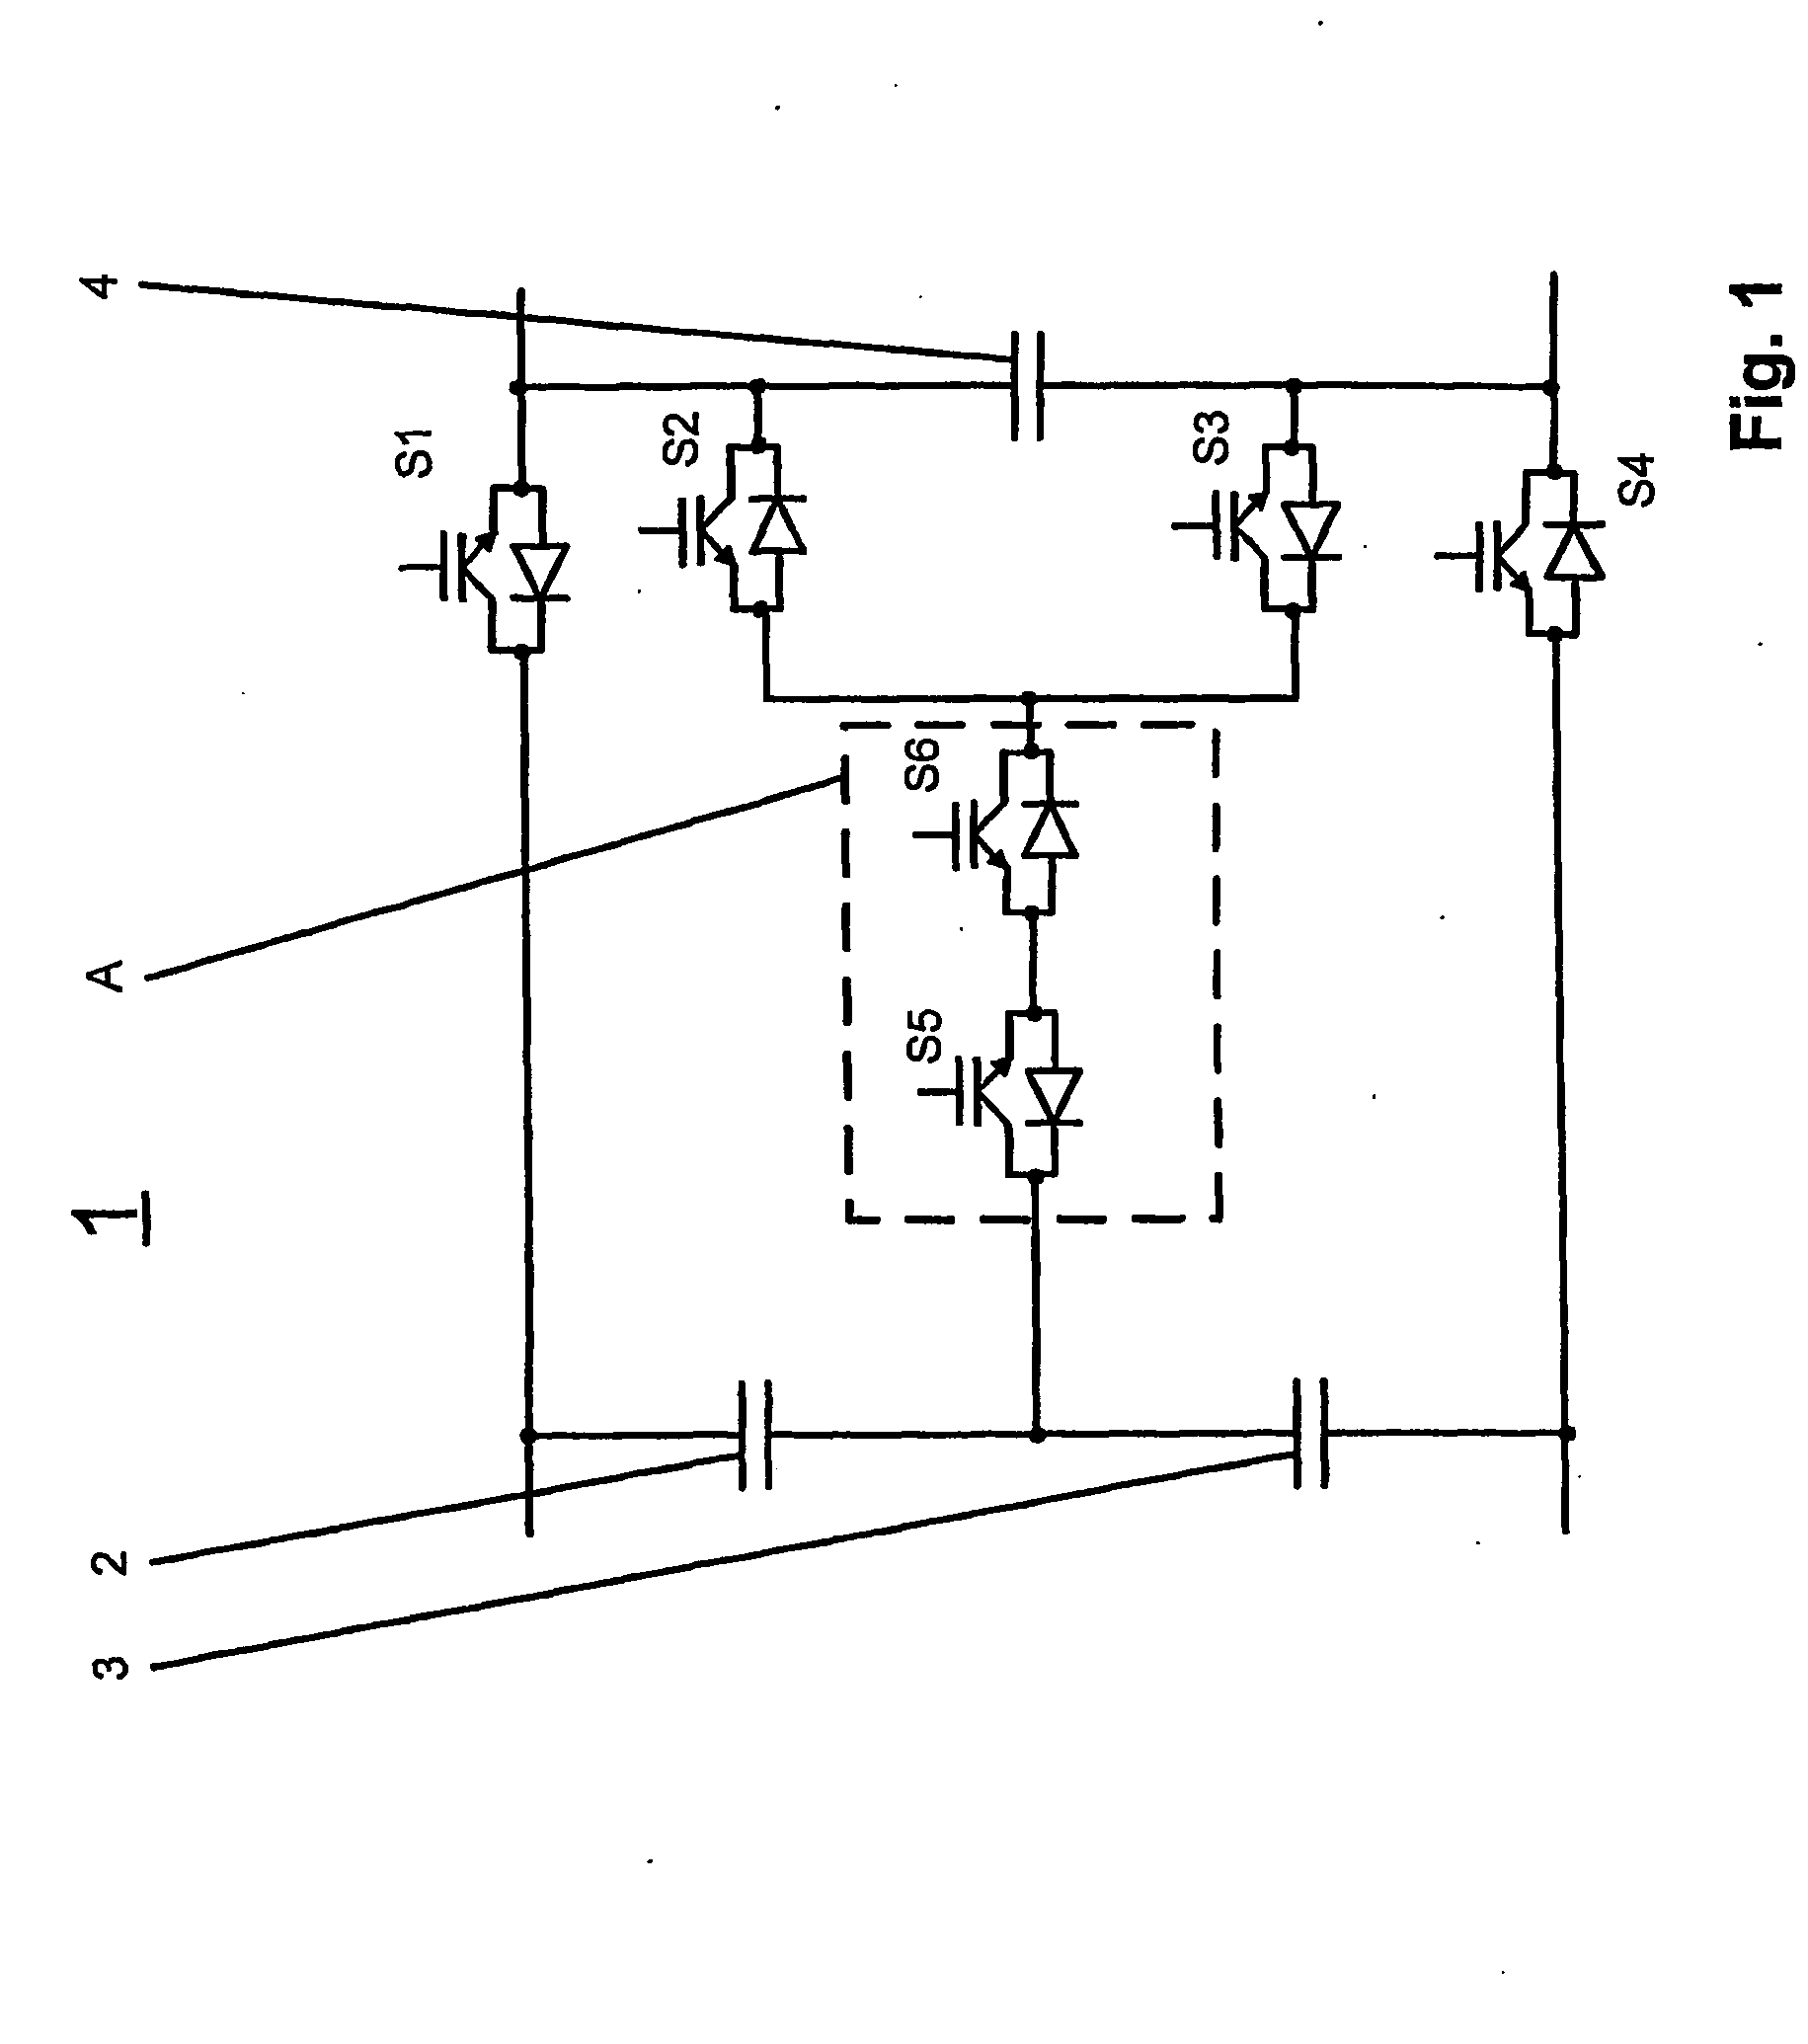 Swithgear cell and converter circuit for switching a large number of voltage levels